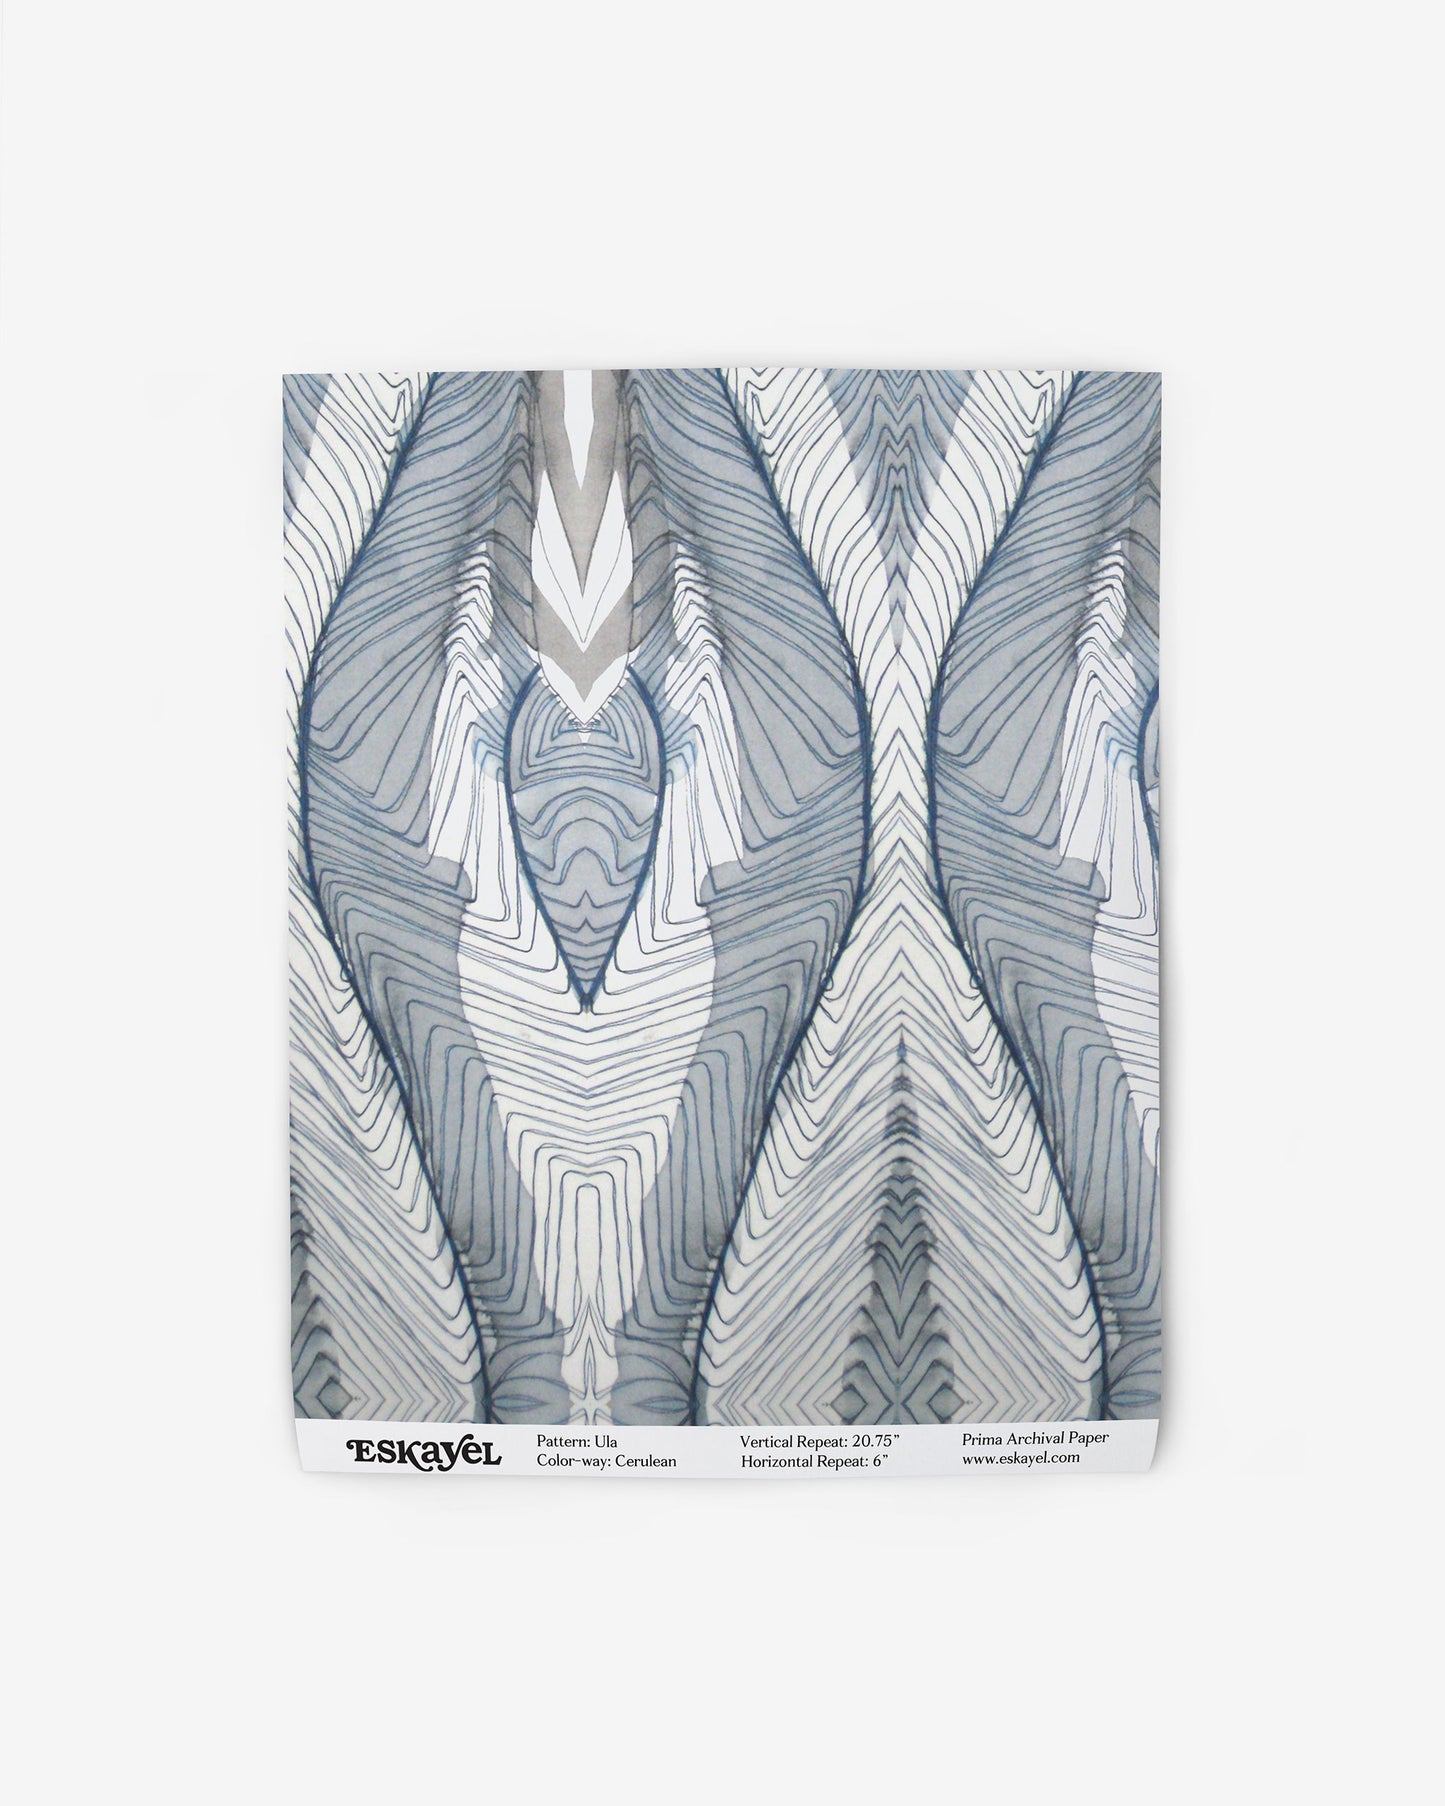 a Ula Wallpaper Sample Cerulean of the blue and white abstract design on a fabric, please visit our website